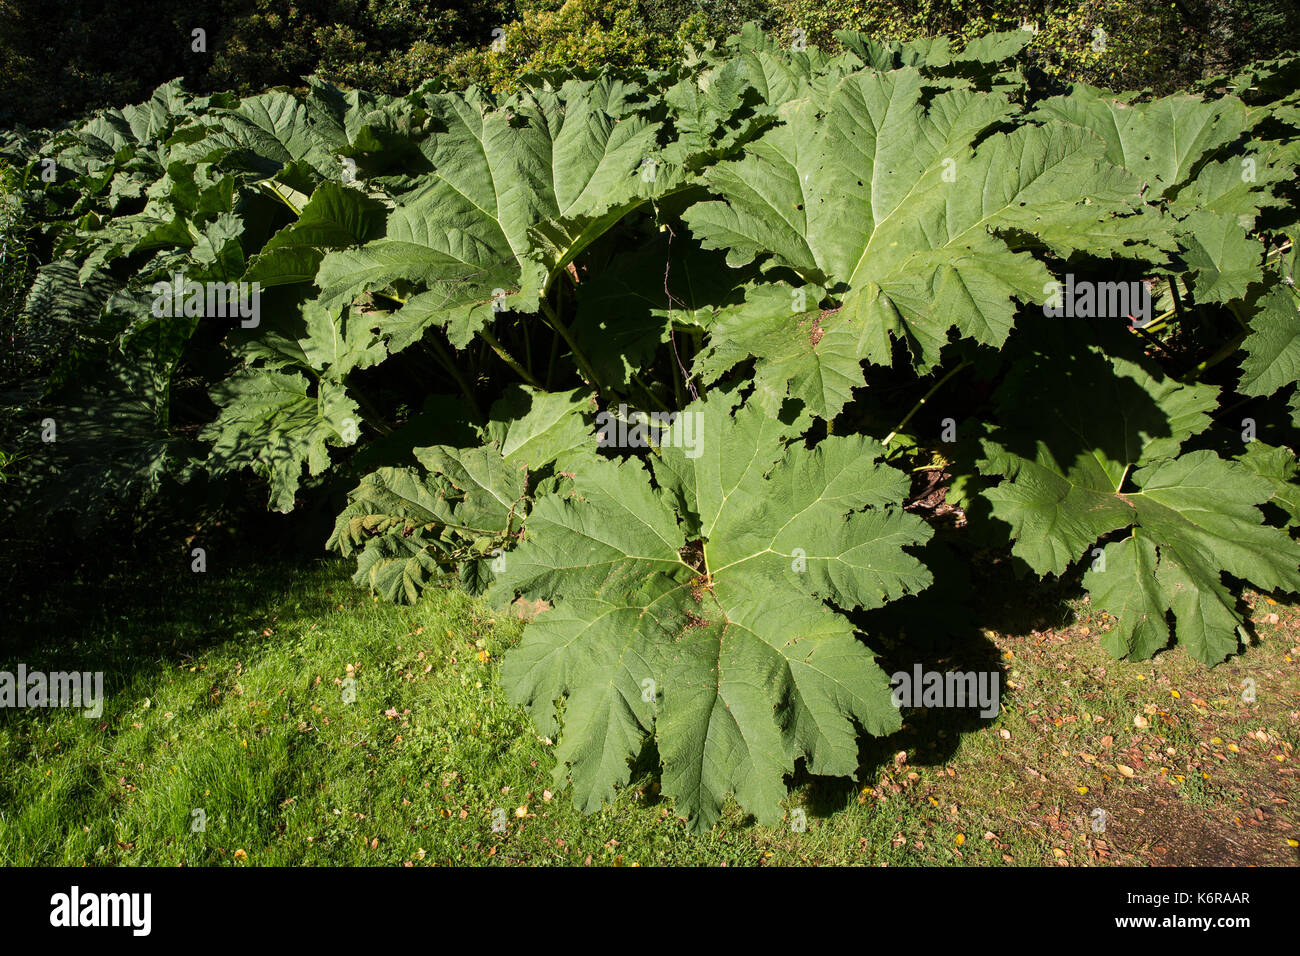 Egham, UK. 13th Sep, 2017. Gunnera manicata at the Savill Garden. Created in the 1930s, the 35-acre Savill Garden contains a series of interconnected gardens and woodland including the Hidden Gardens, Spring Wood, the Summer Gardens, the New Zealand Garden, Summer Wood, The Glades, Autumn Wood and the Winter Beds. Credit: Mark Kerrison/Alamy Live News Stock Photo